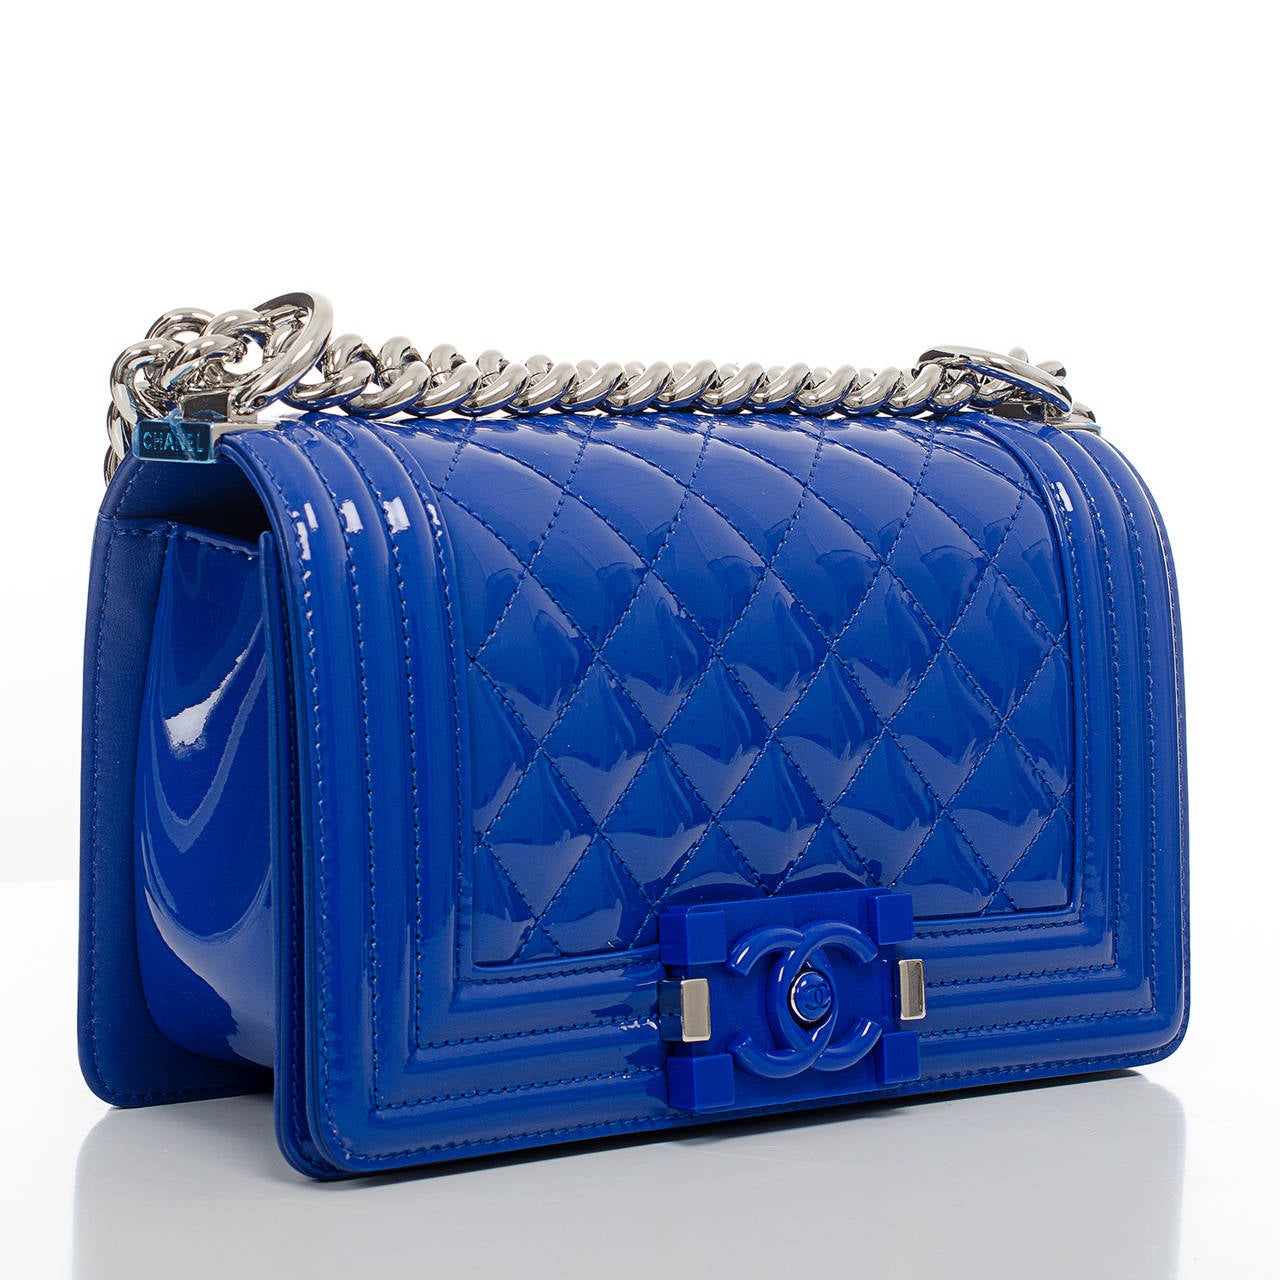 This limited edition Small Boy style features blue marine quilted patent lather and silver tone hardware. This bag features a front flap with a blue marine plexiglass CC push lock closure and a silver tone chain link and blue marine leather padded